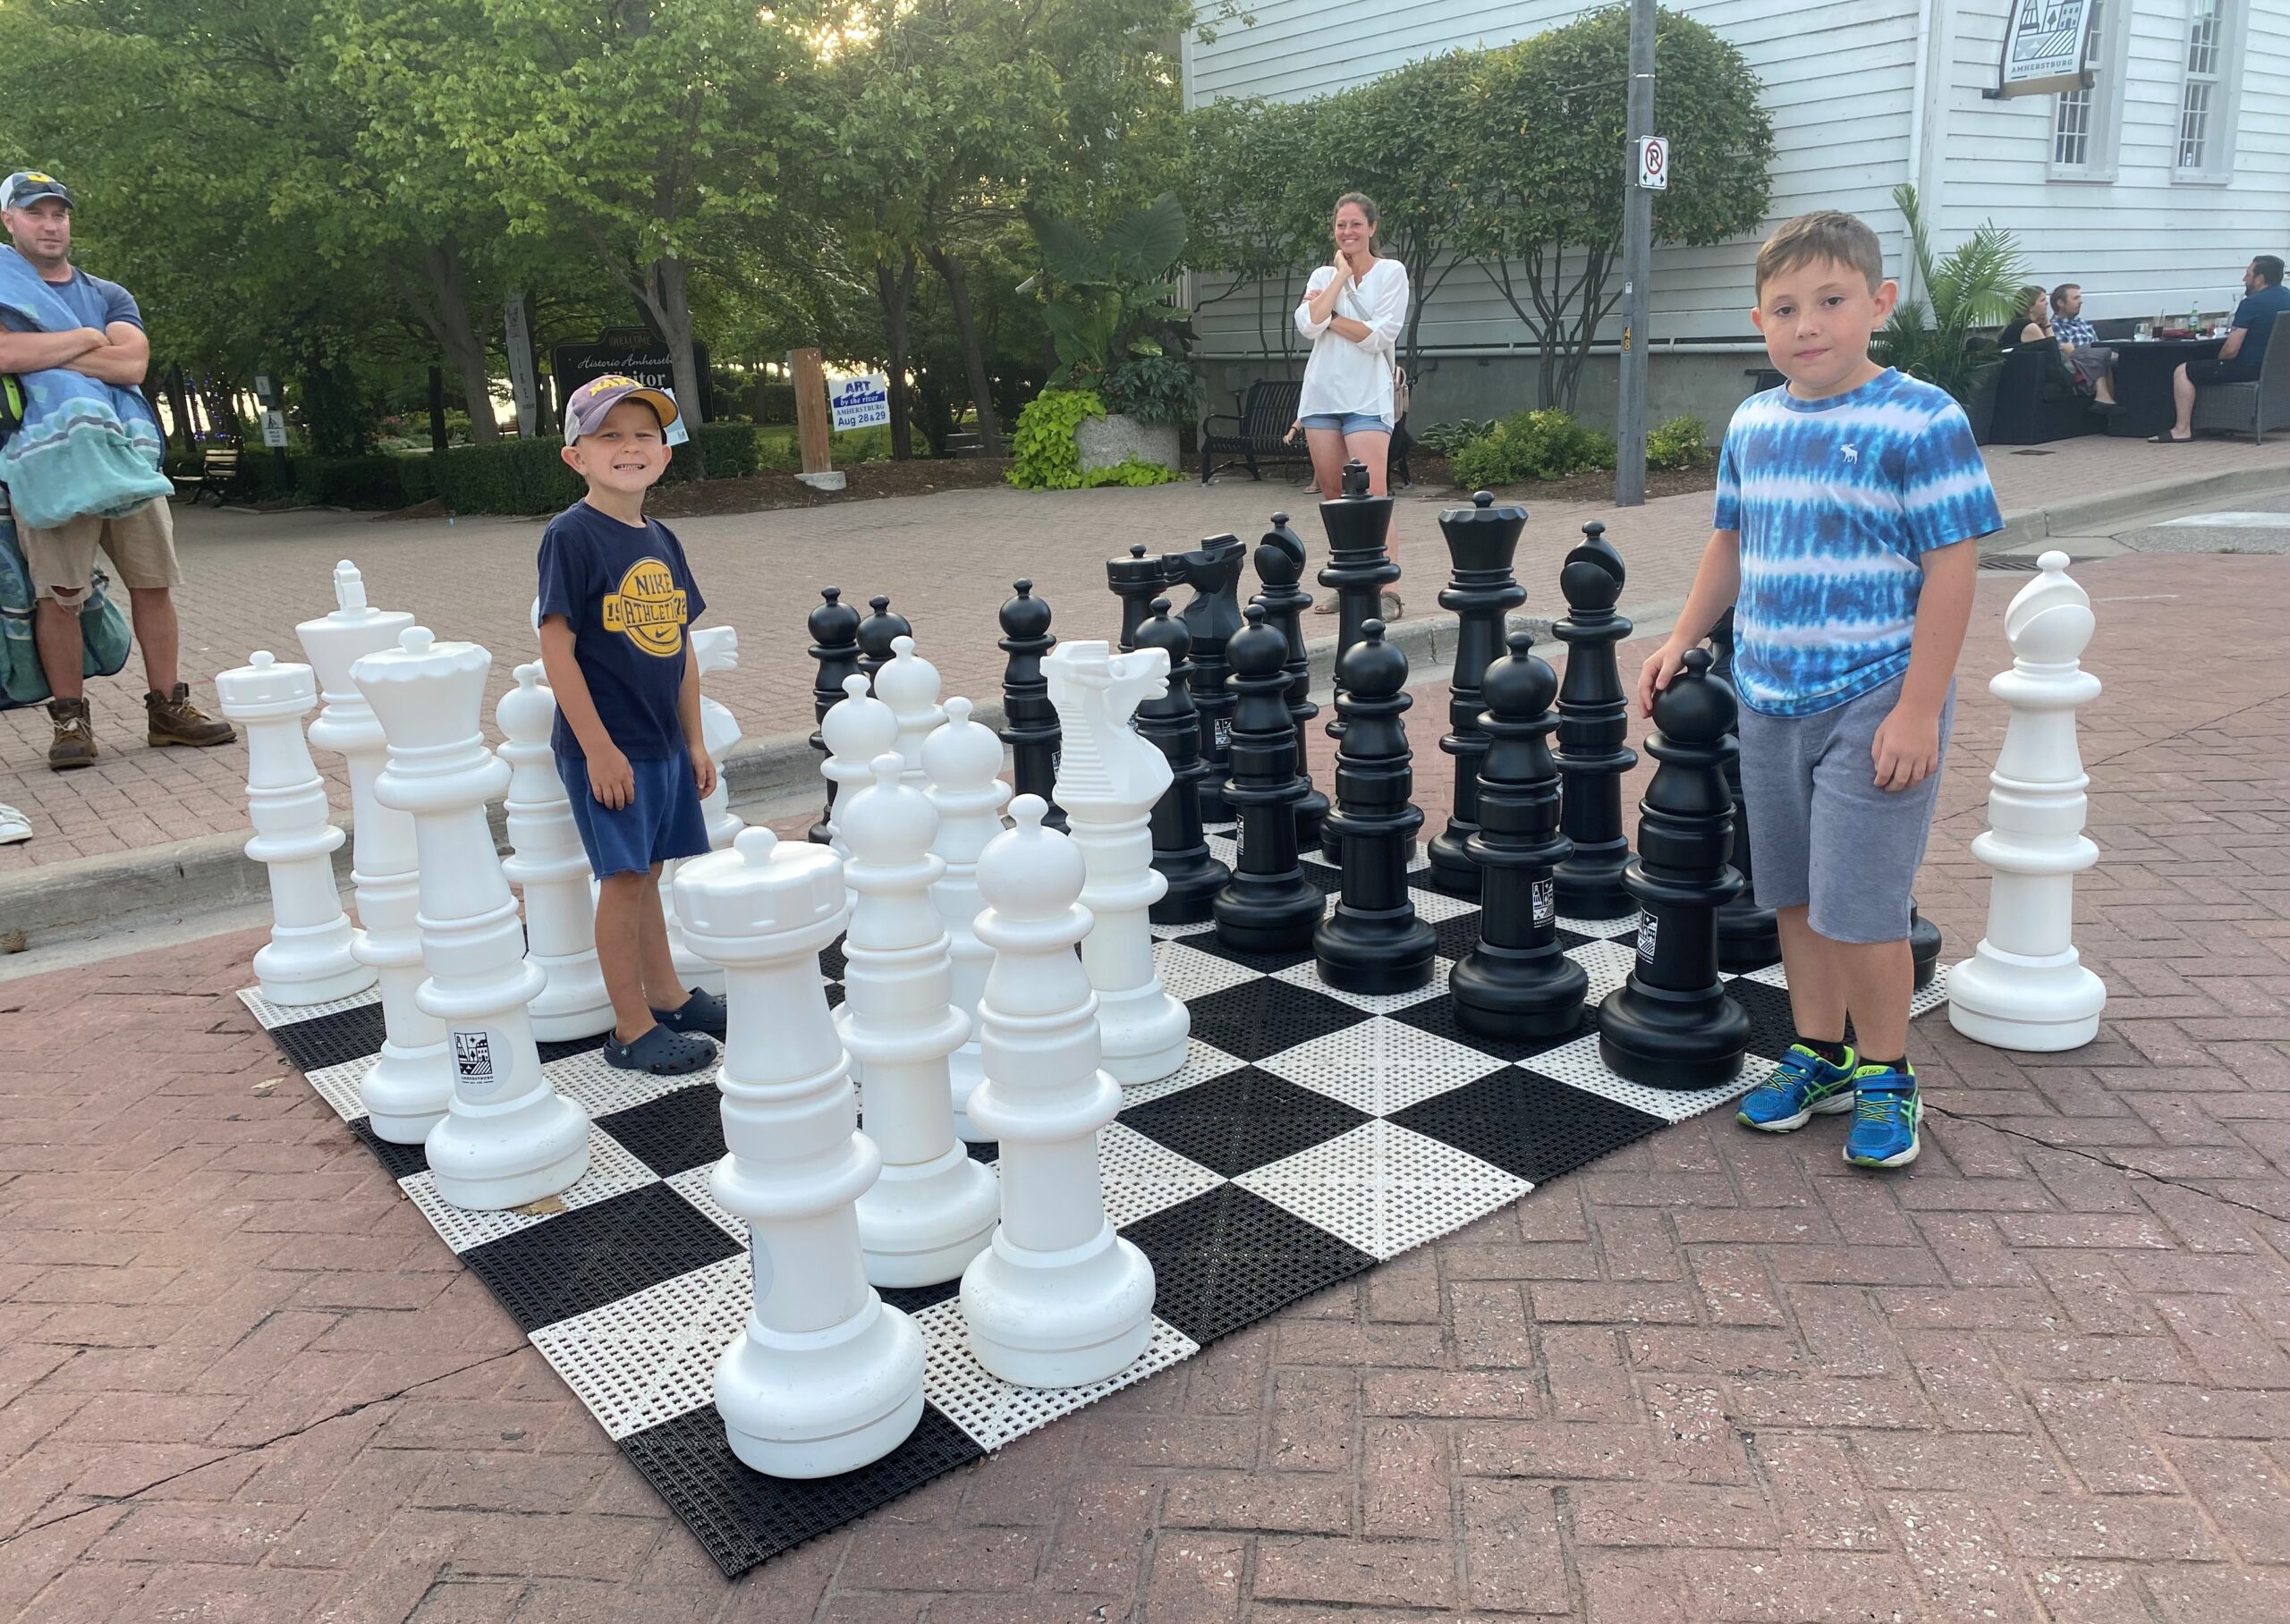 Two boys playing life-sized chess